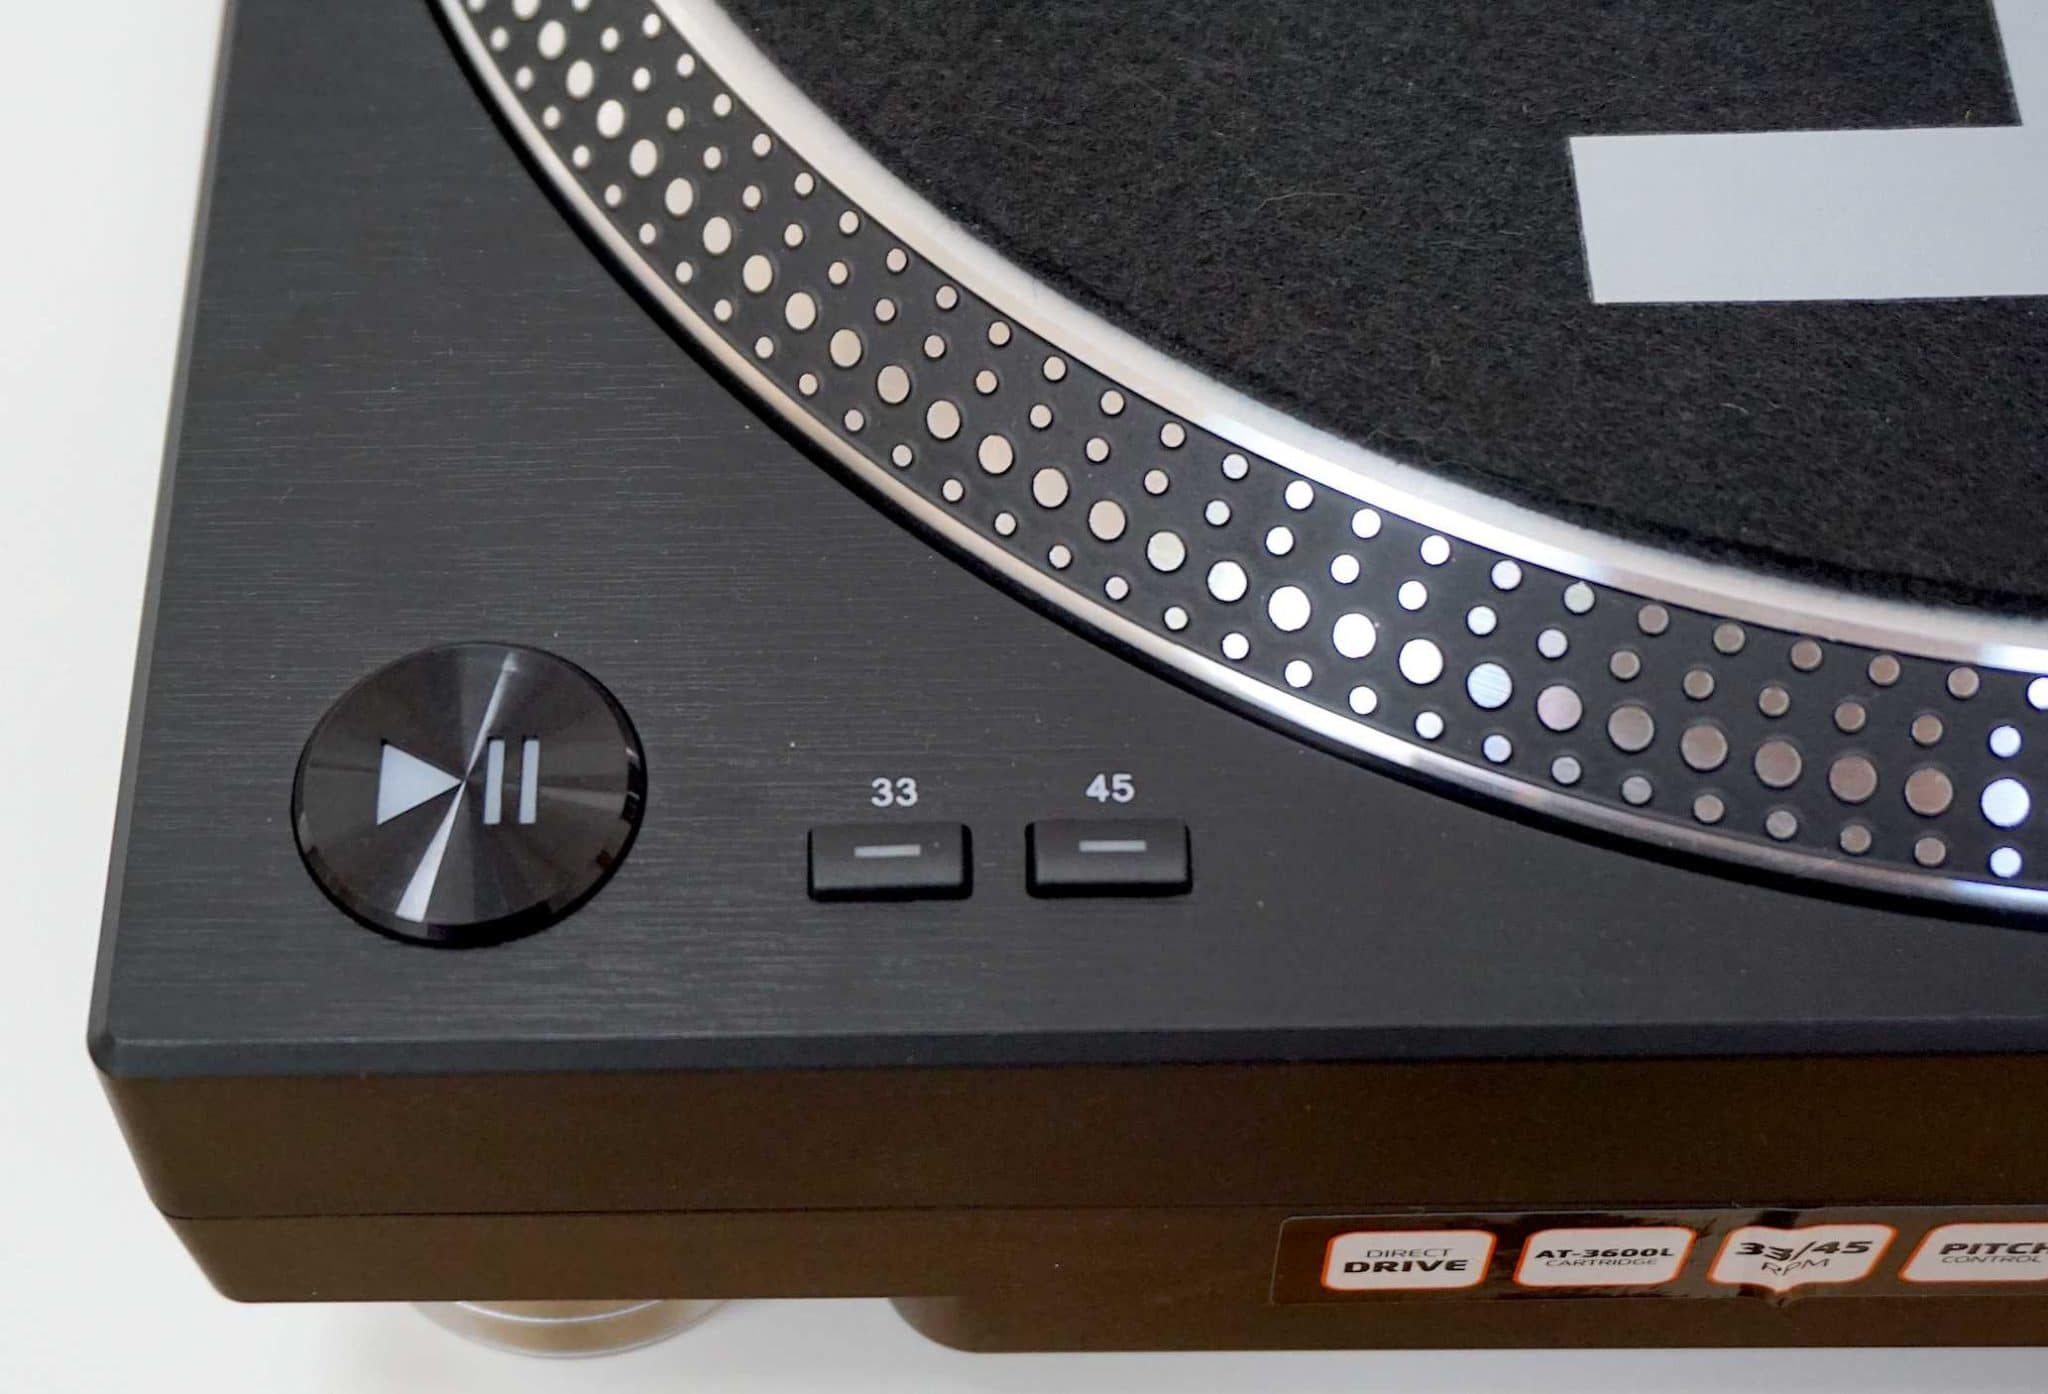 L-3809 Turntable From Lenco